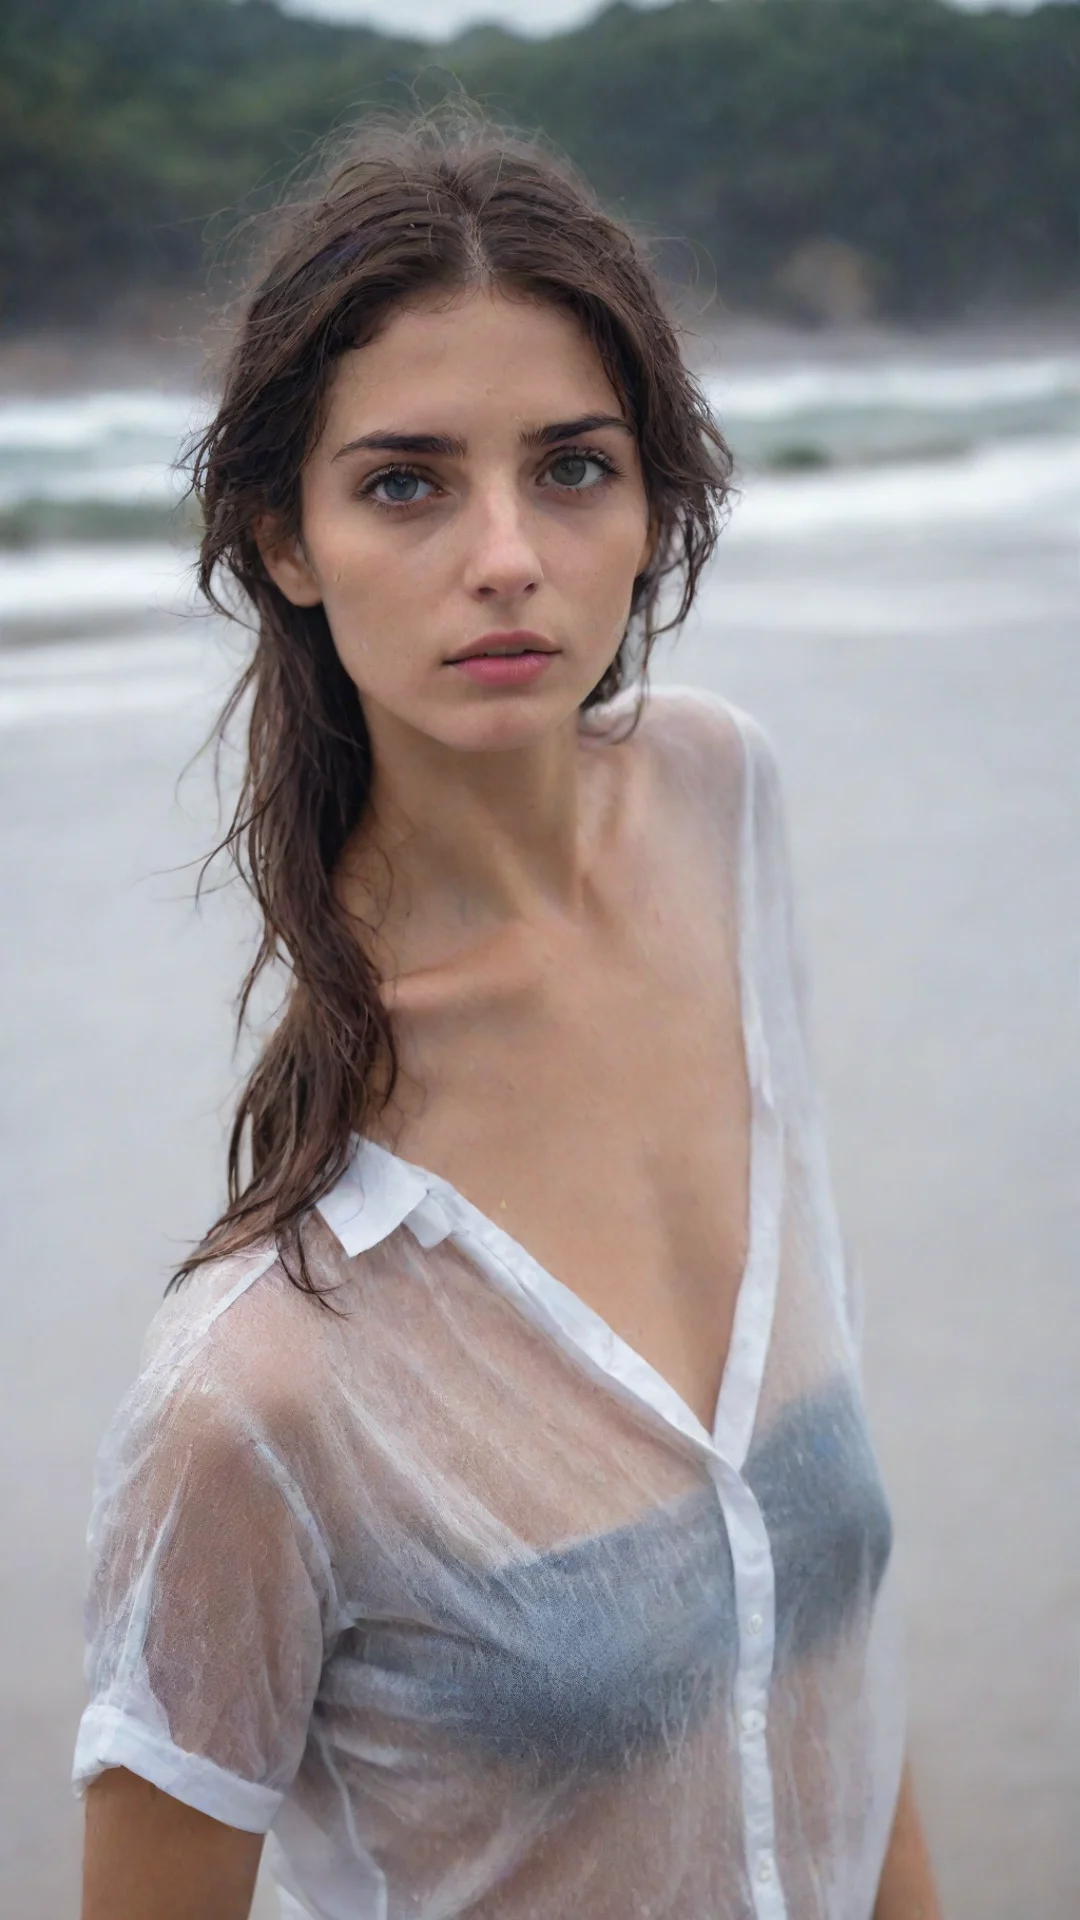 aitrending sensual portrait of a lonely young italian woman in a thin transparent white shirt at a wet and rainy beach good looking trending fantastic 1 good looking fantastic 1 tall